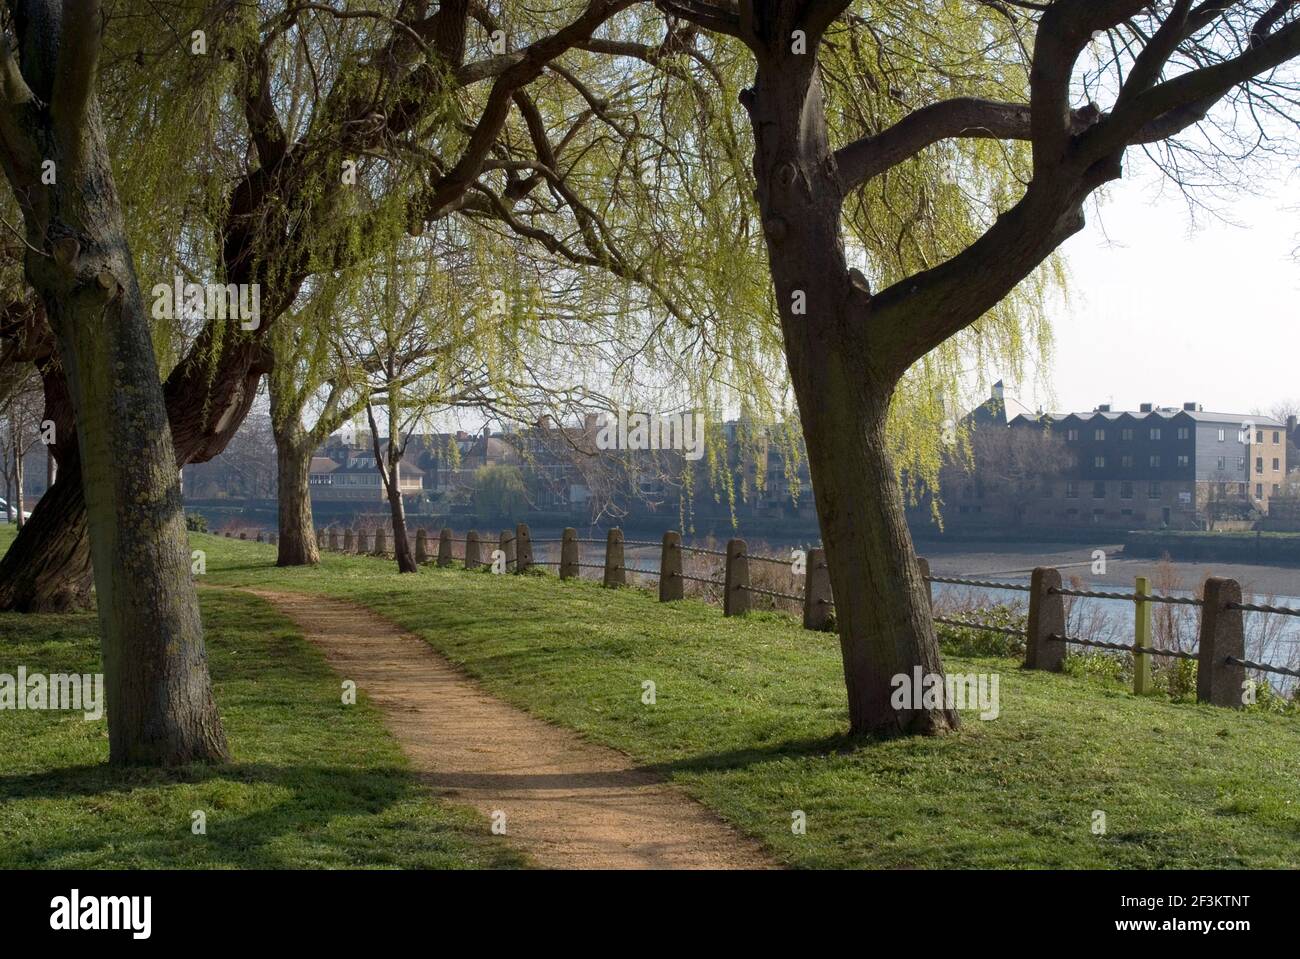 Spaziergang entlang der Themse, Chiswick, London W4, England Stockfoto